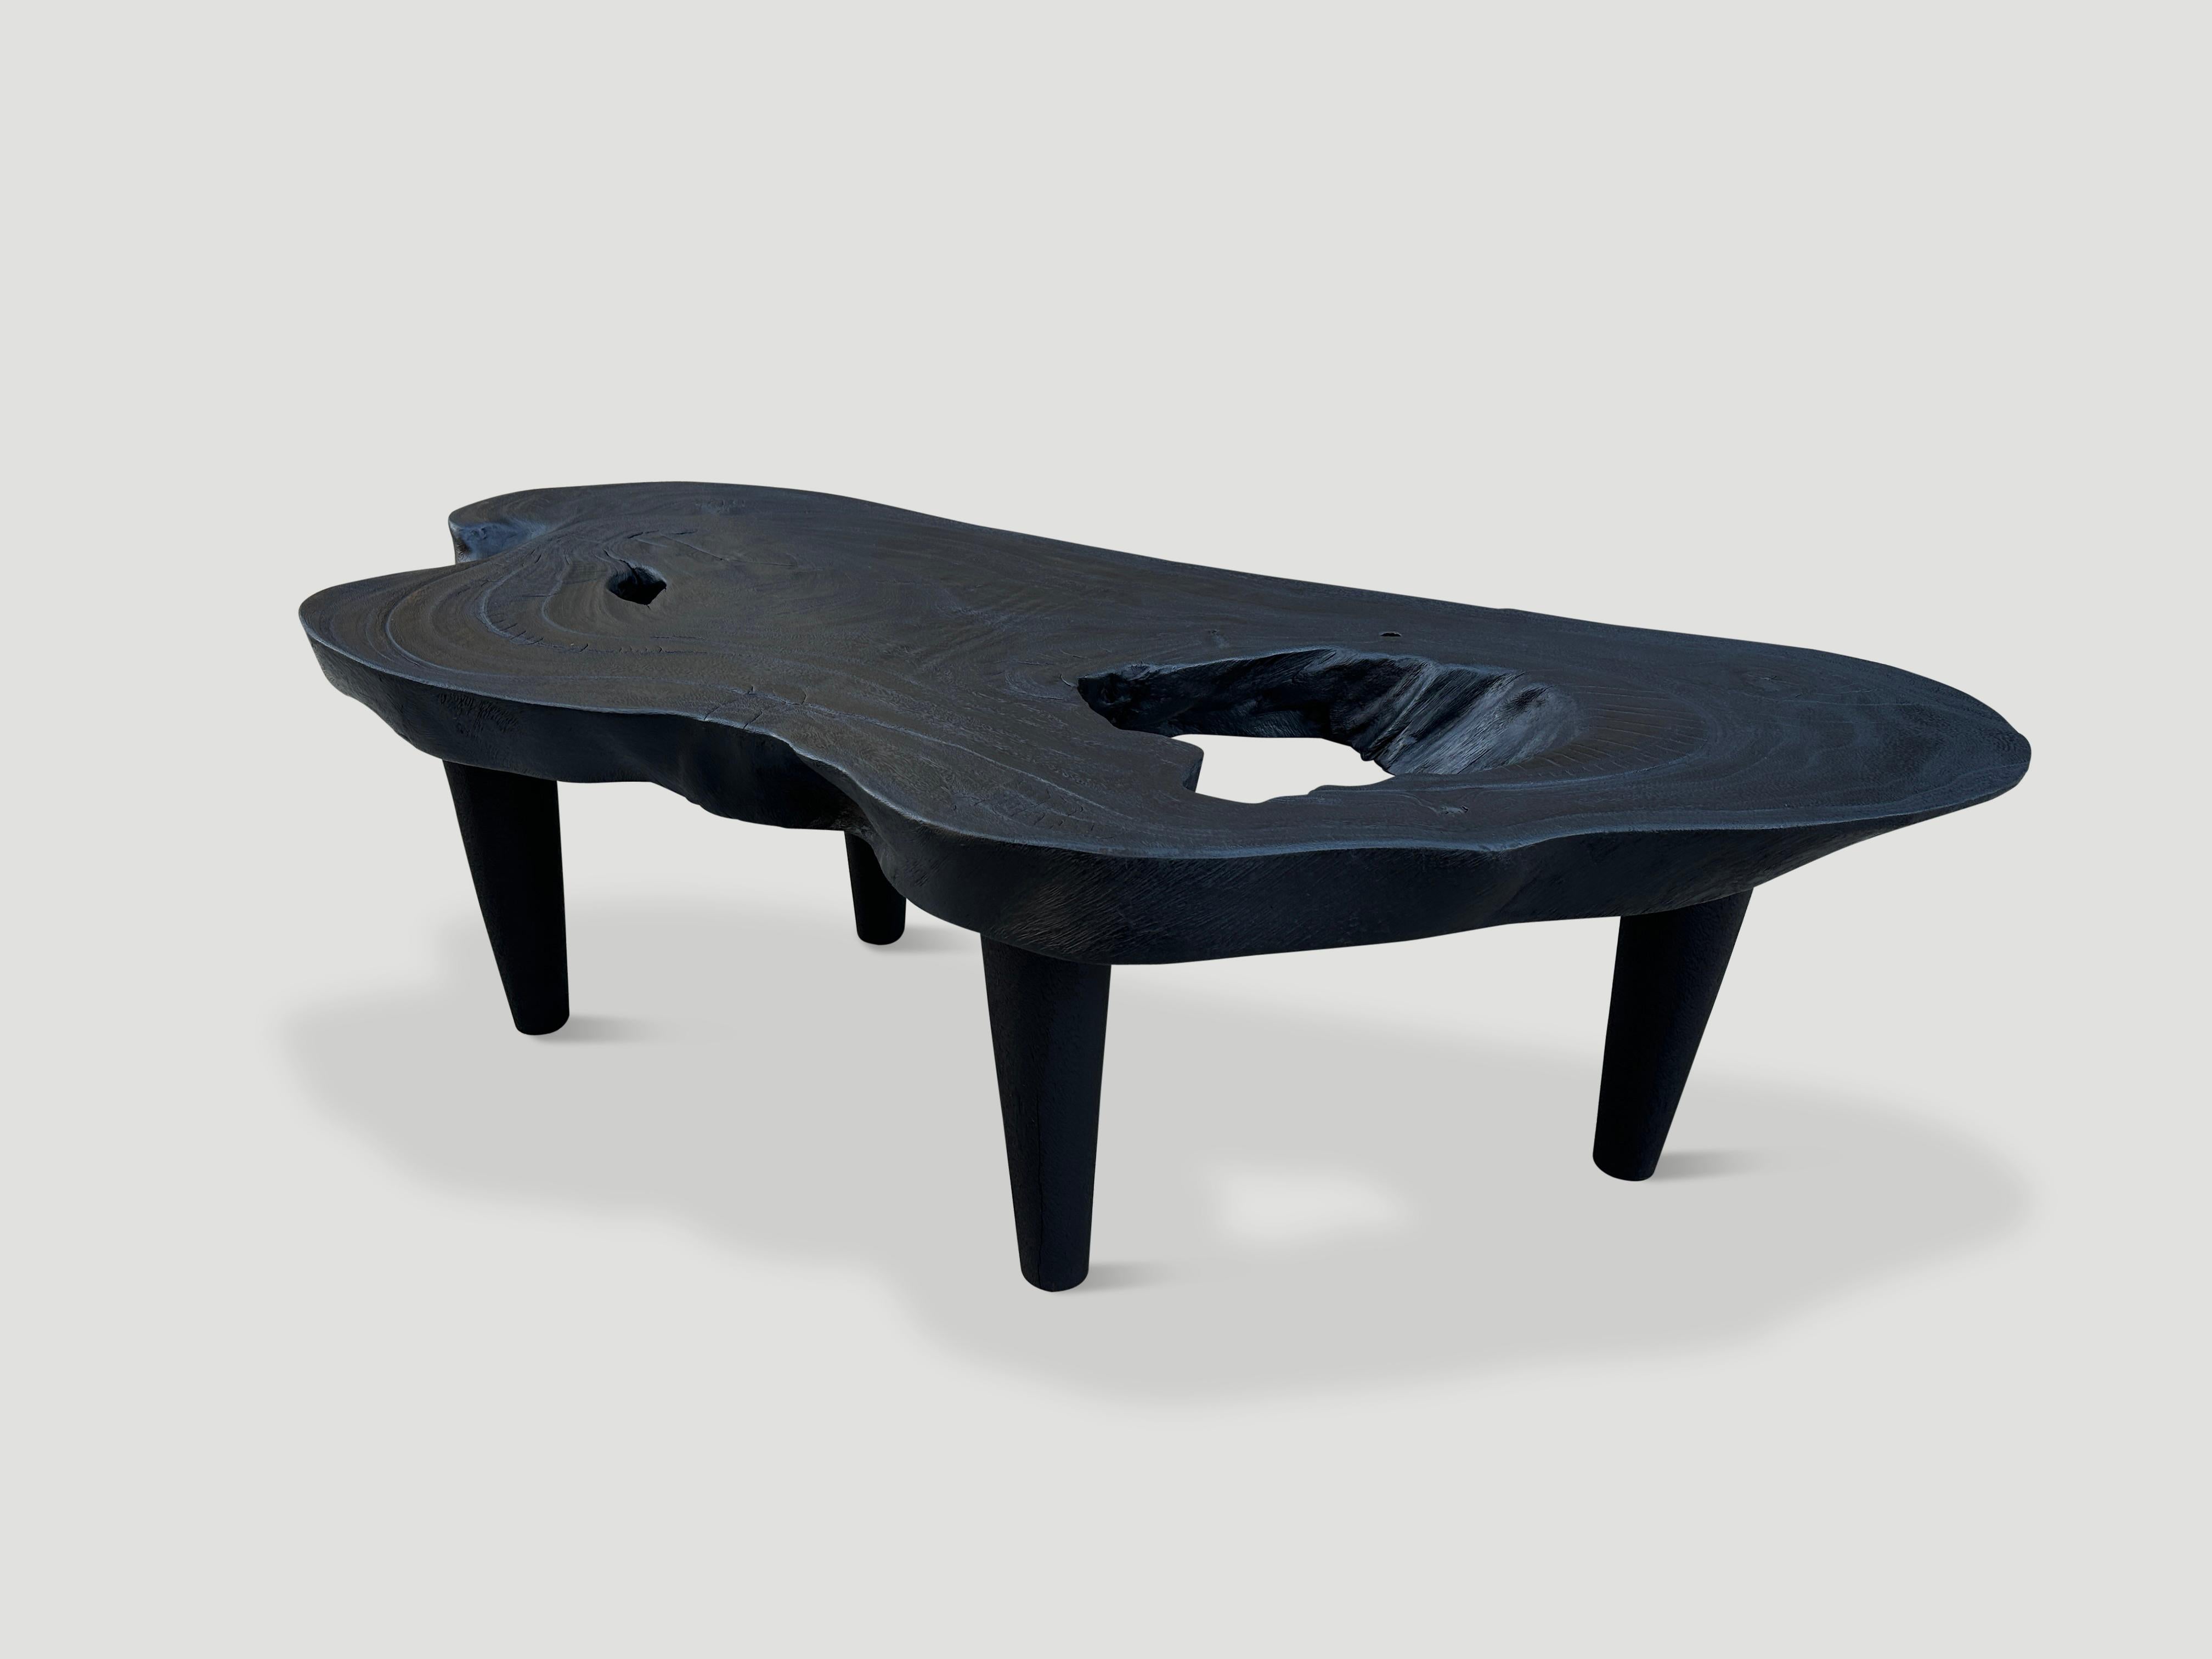 Andrianna Shamaris Suar Wood Minimalist Charred Coffee Table  In Excellent Condition For Sale In New York, NY